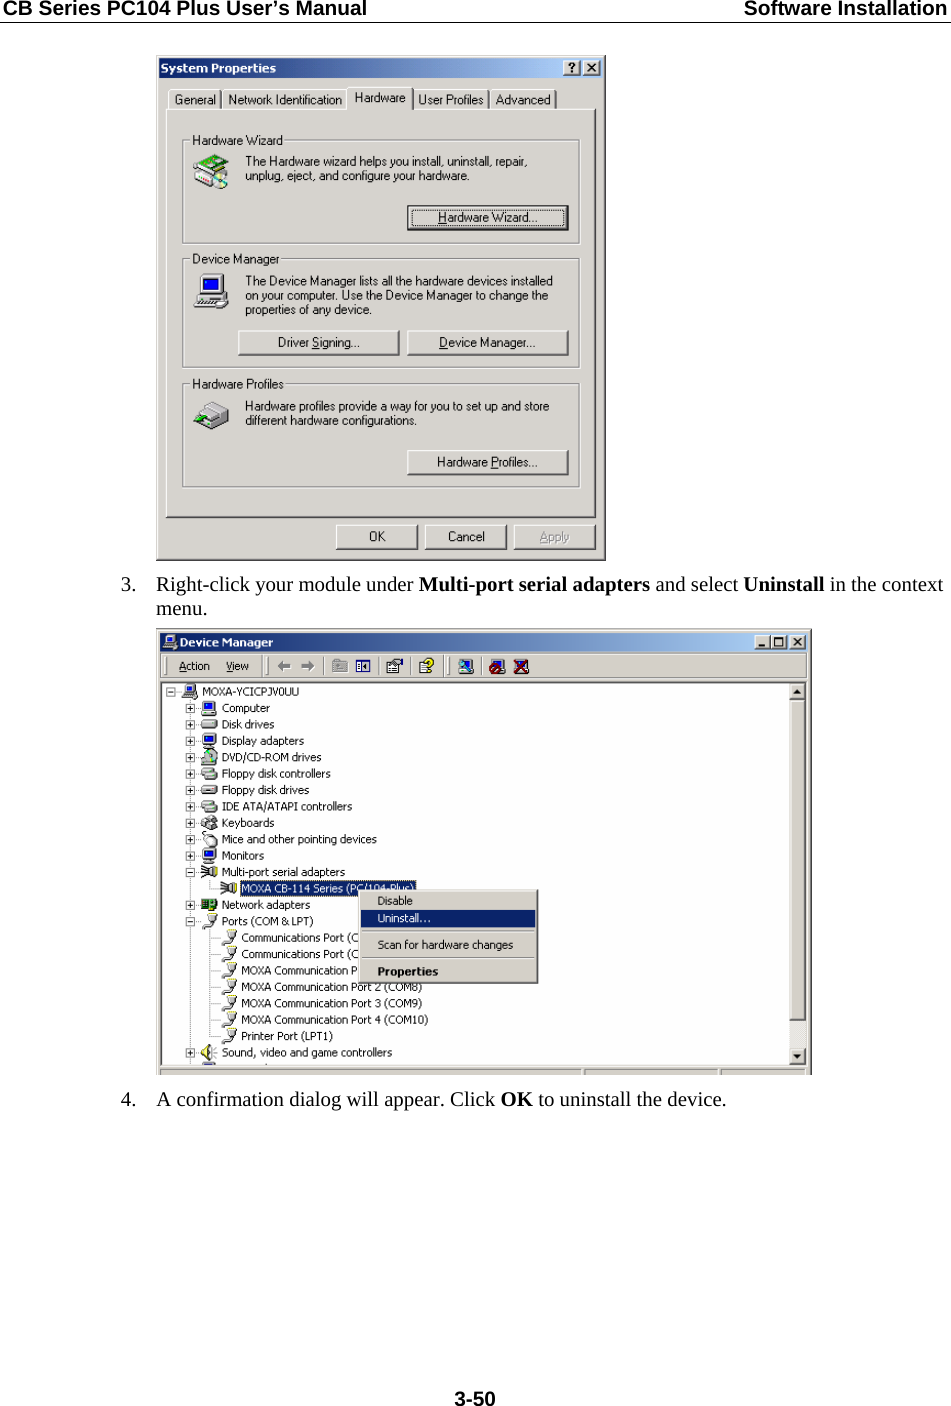 CB Series PC104 Plus User’s Manual  Software Installation  3. Right-click your module under Multi-port serial adapters and select Uninstall in the context menu.   4. A confirmation dialog will appear. Click OK to uninstall the device.         3-50